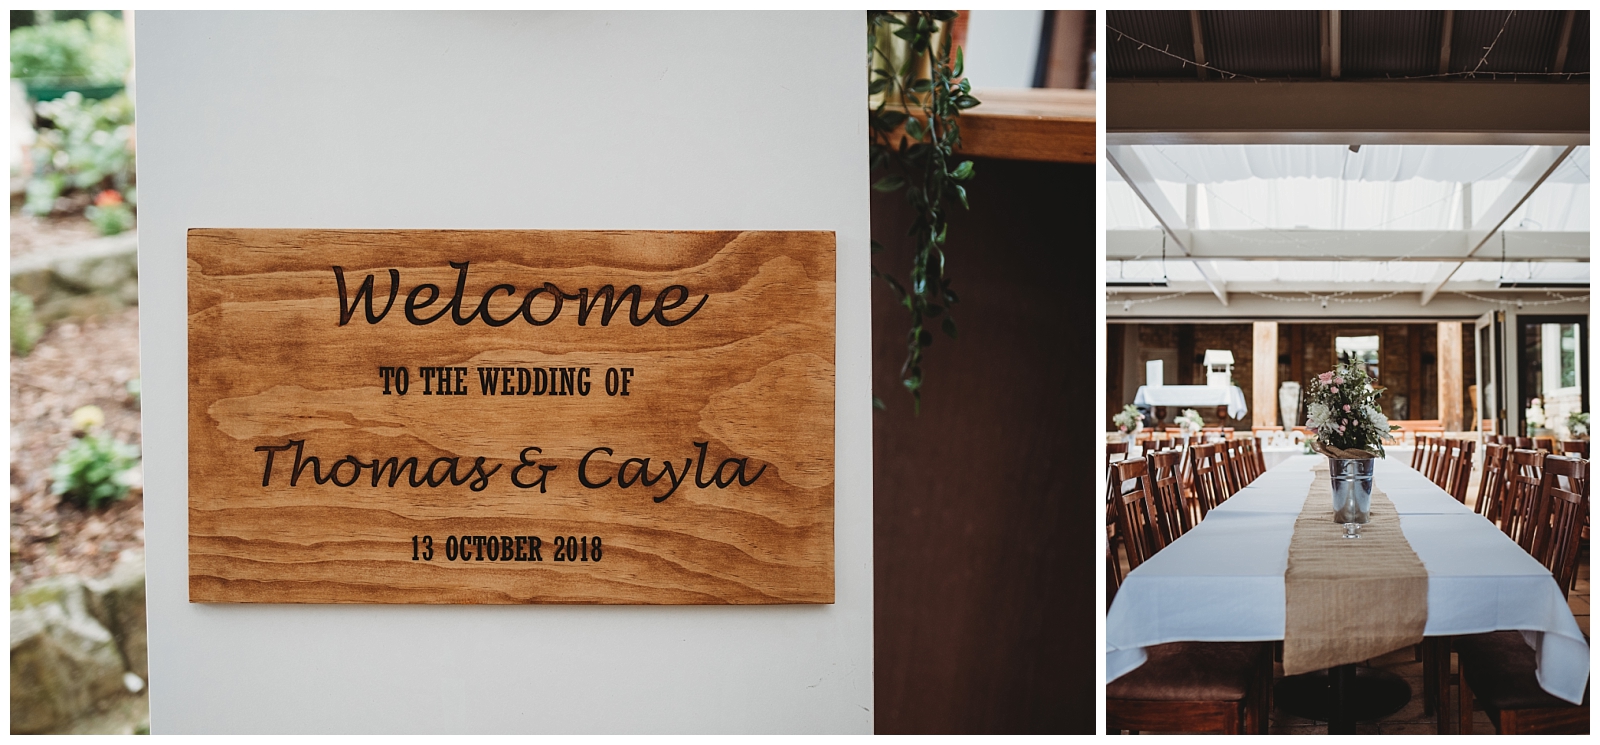 Wooden wedding welcome sign. Table length with white linen and flower in vase.